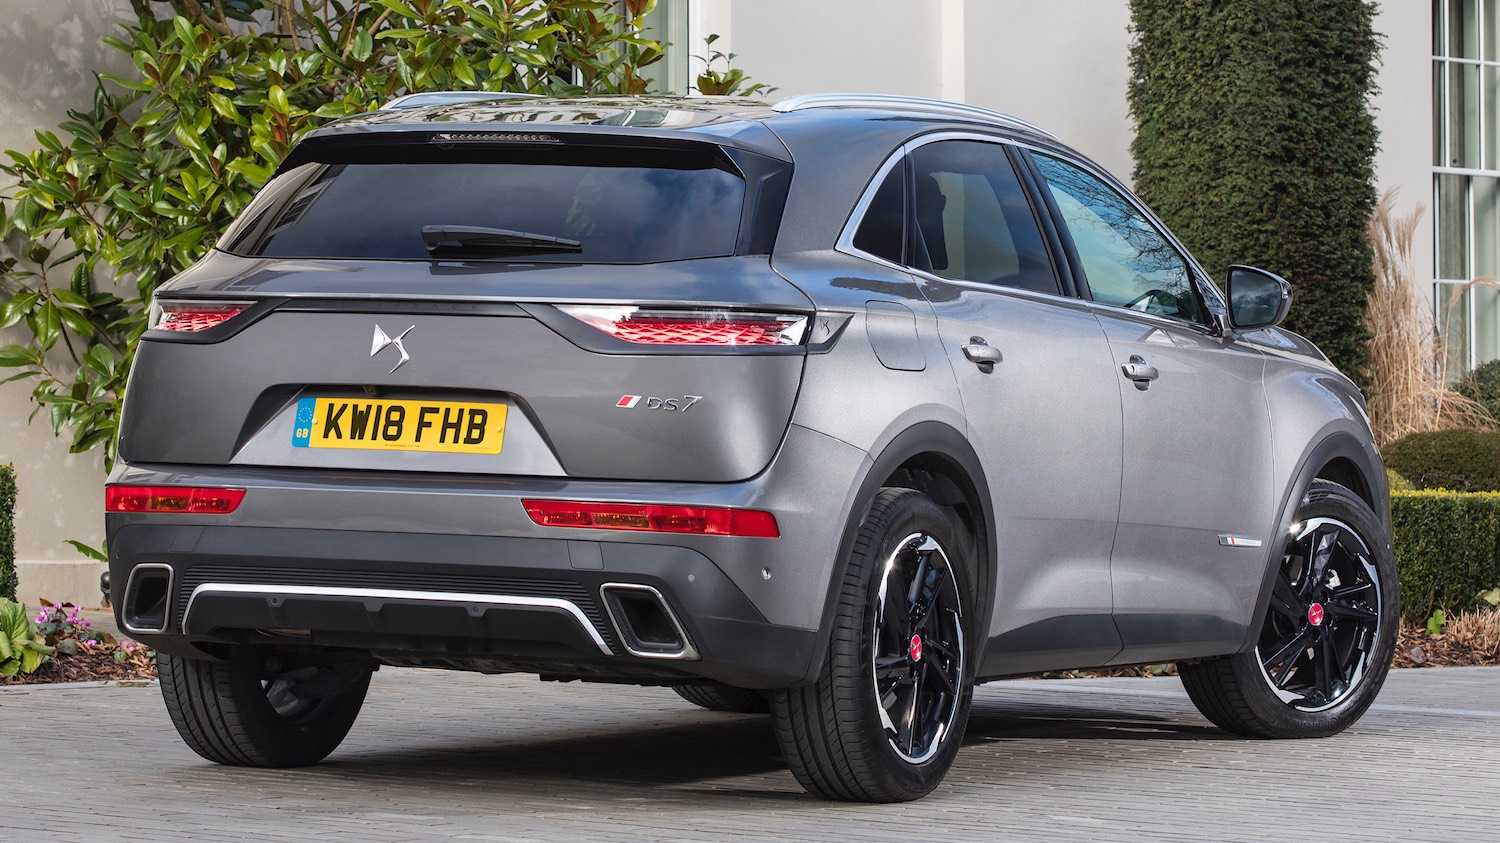 Drive Co Uk Reviewed The Ds 7 Performance Line Suv Fashionably